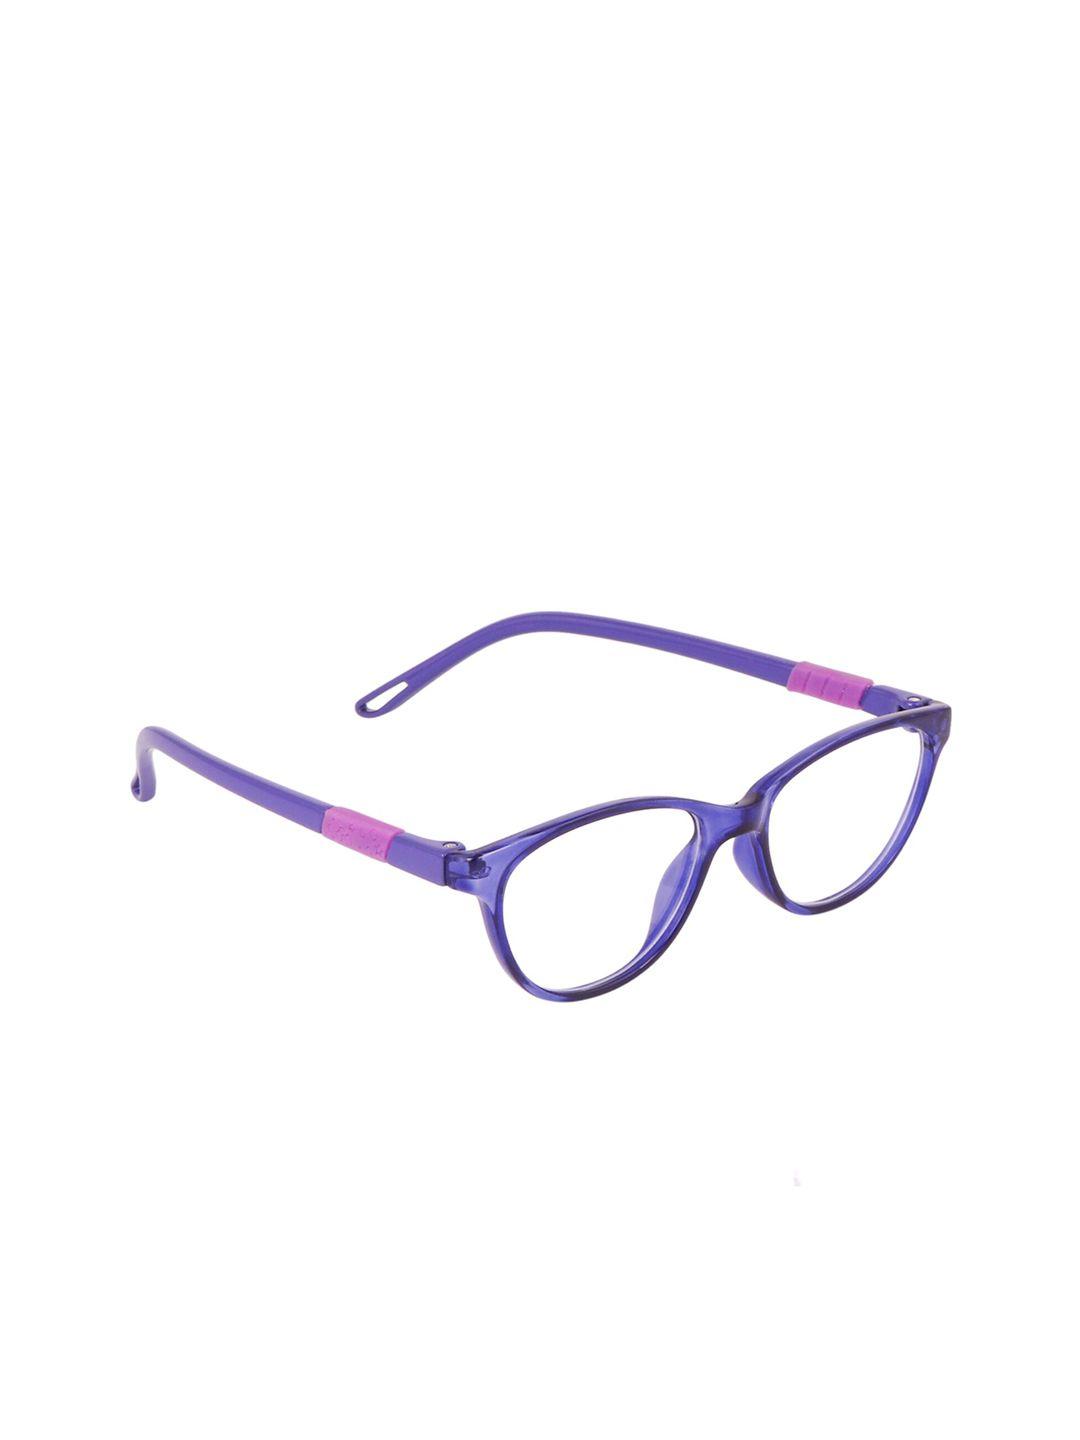 optify adults clear lens & purple cateye sunglass with uv protected lens poppin cateye